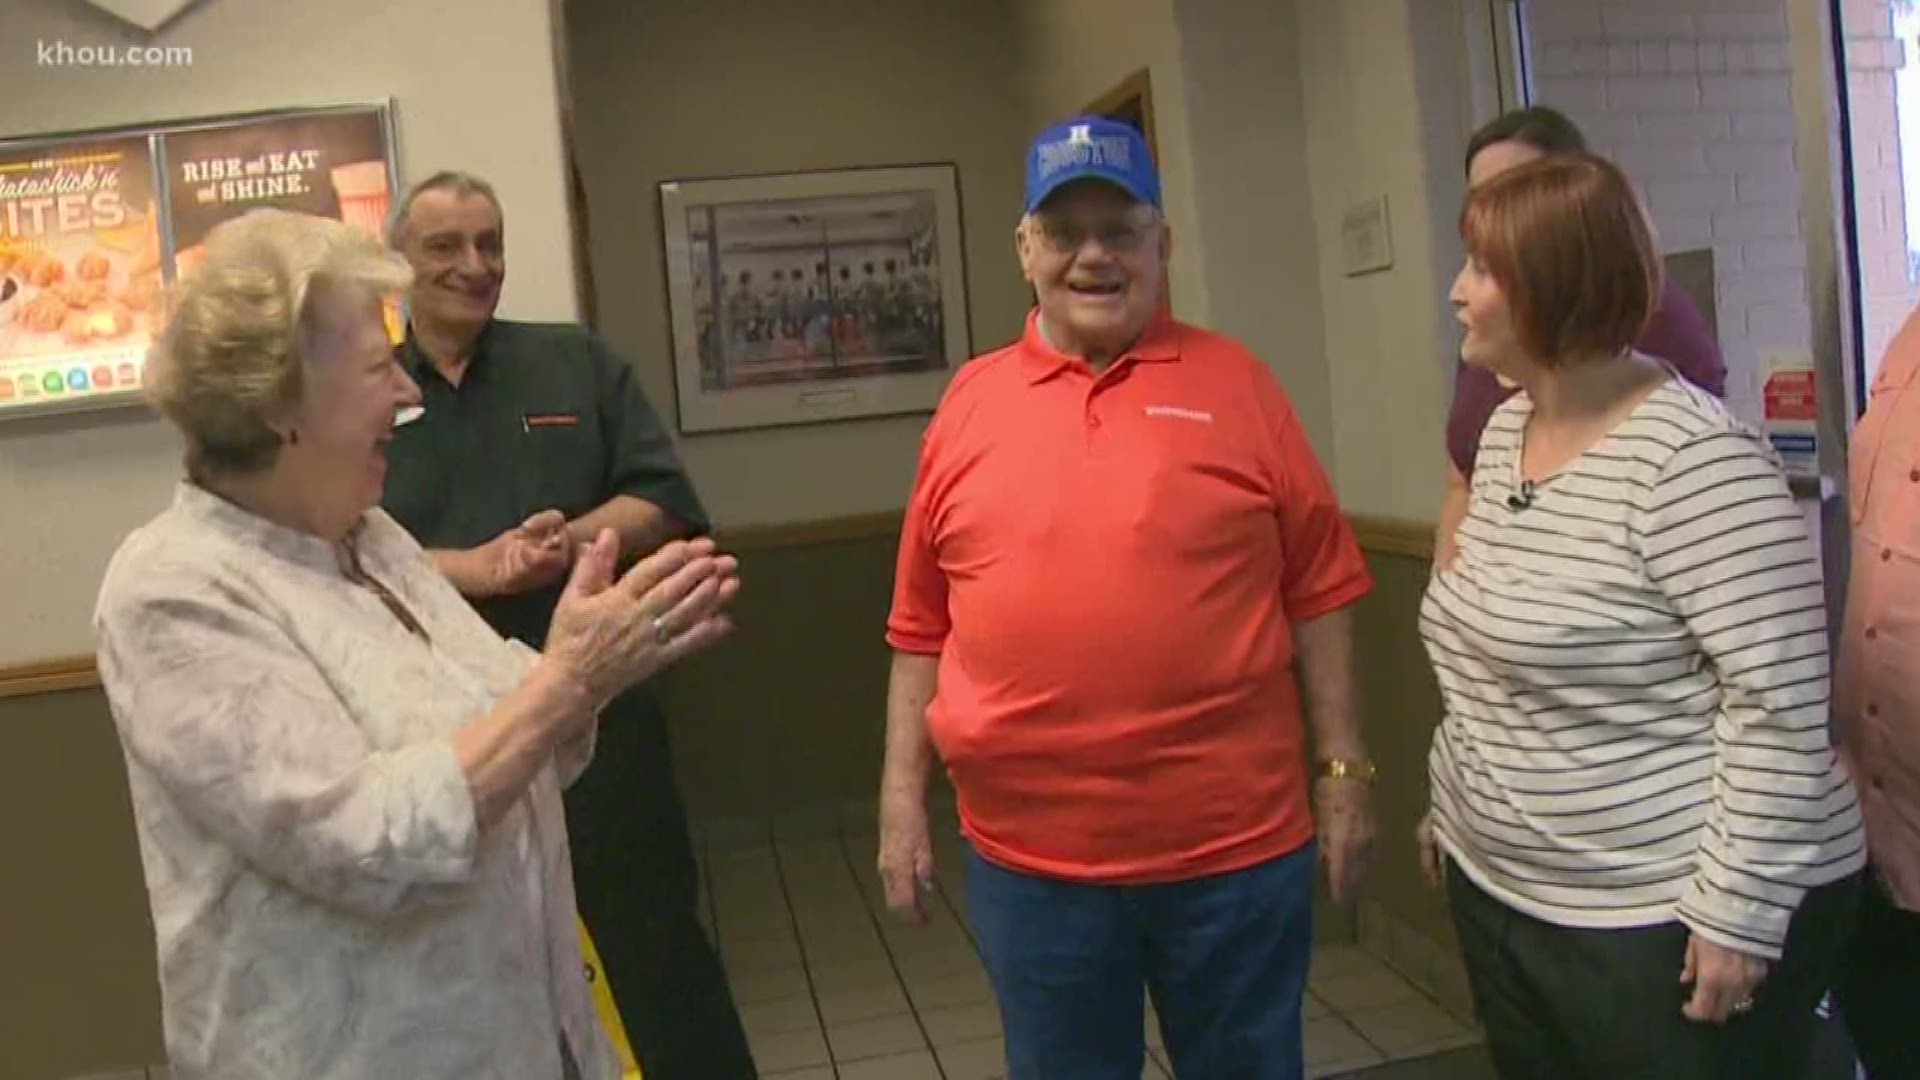 Whataburger helped pull off a fantastic surprise party for one of their favorite customers who turned 90 recently.